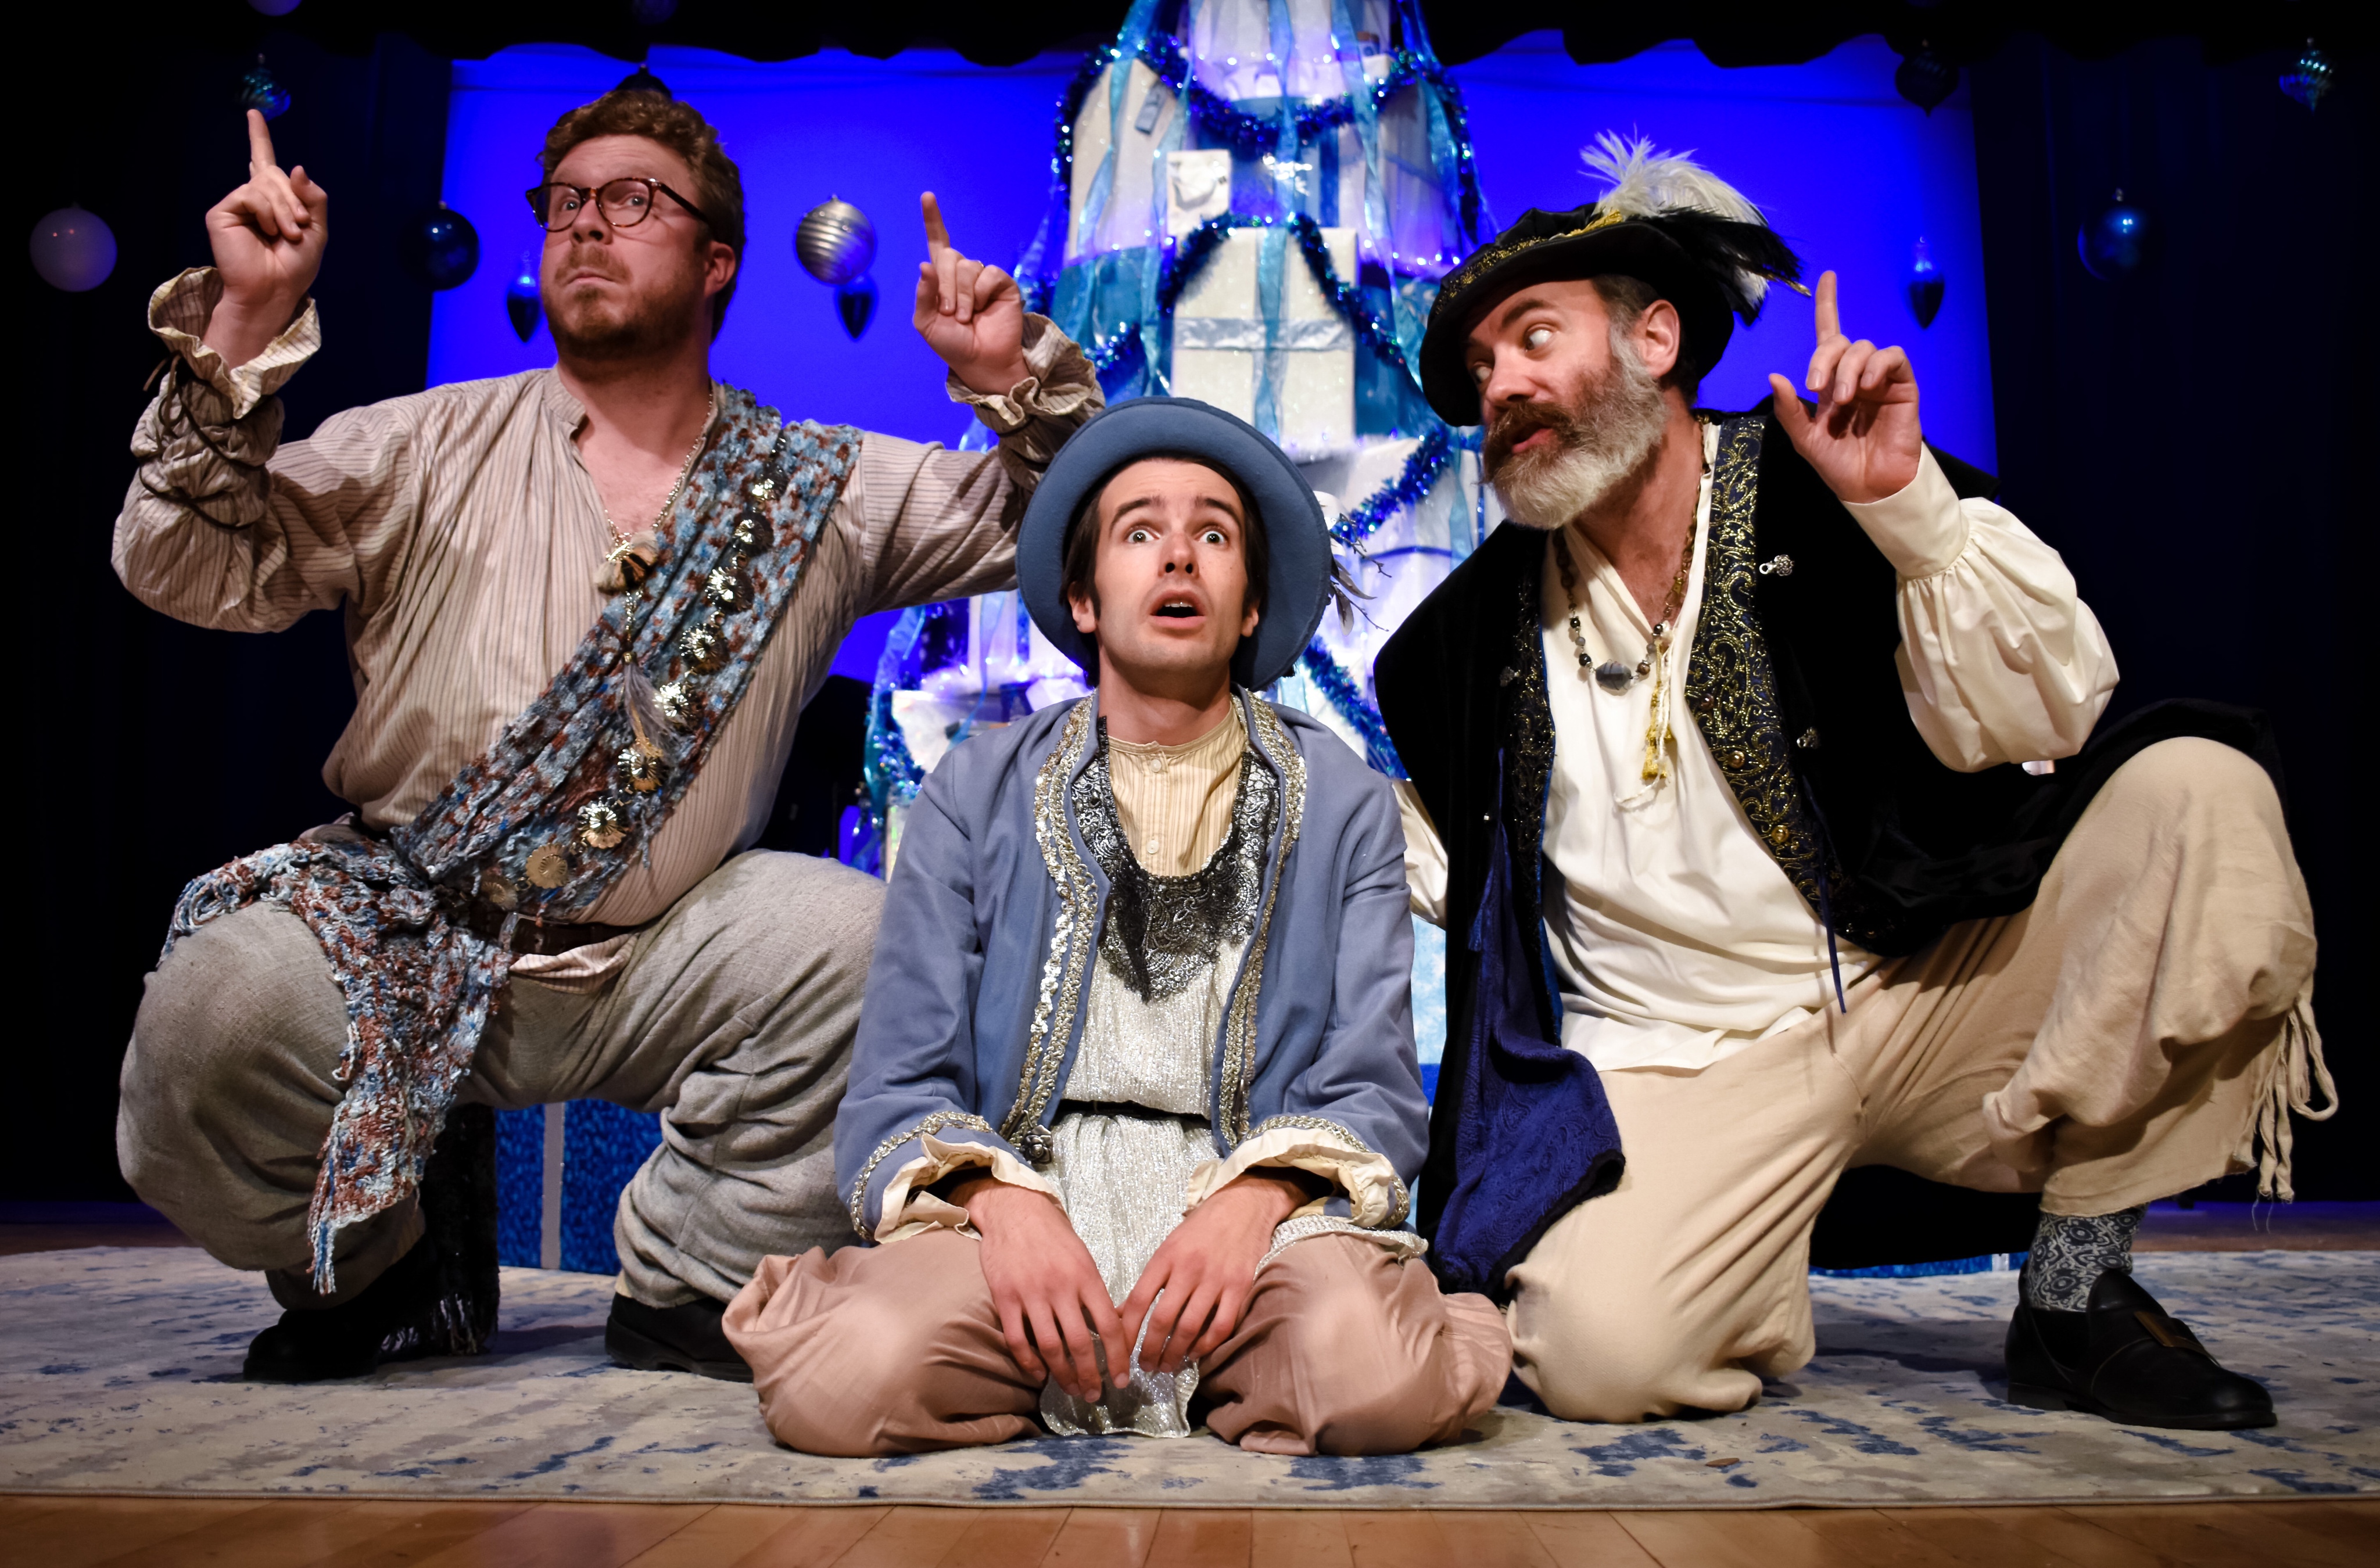 James Patefield, Nolan Ellsworth and Chris Holt in 12th Night. Photo by Michelle Handley